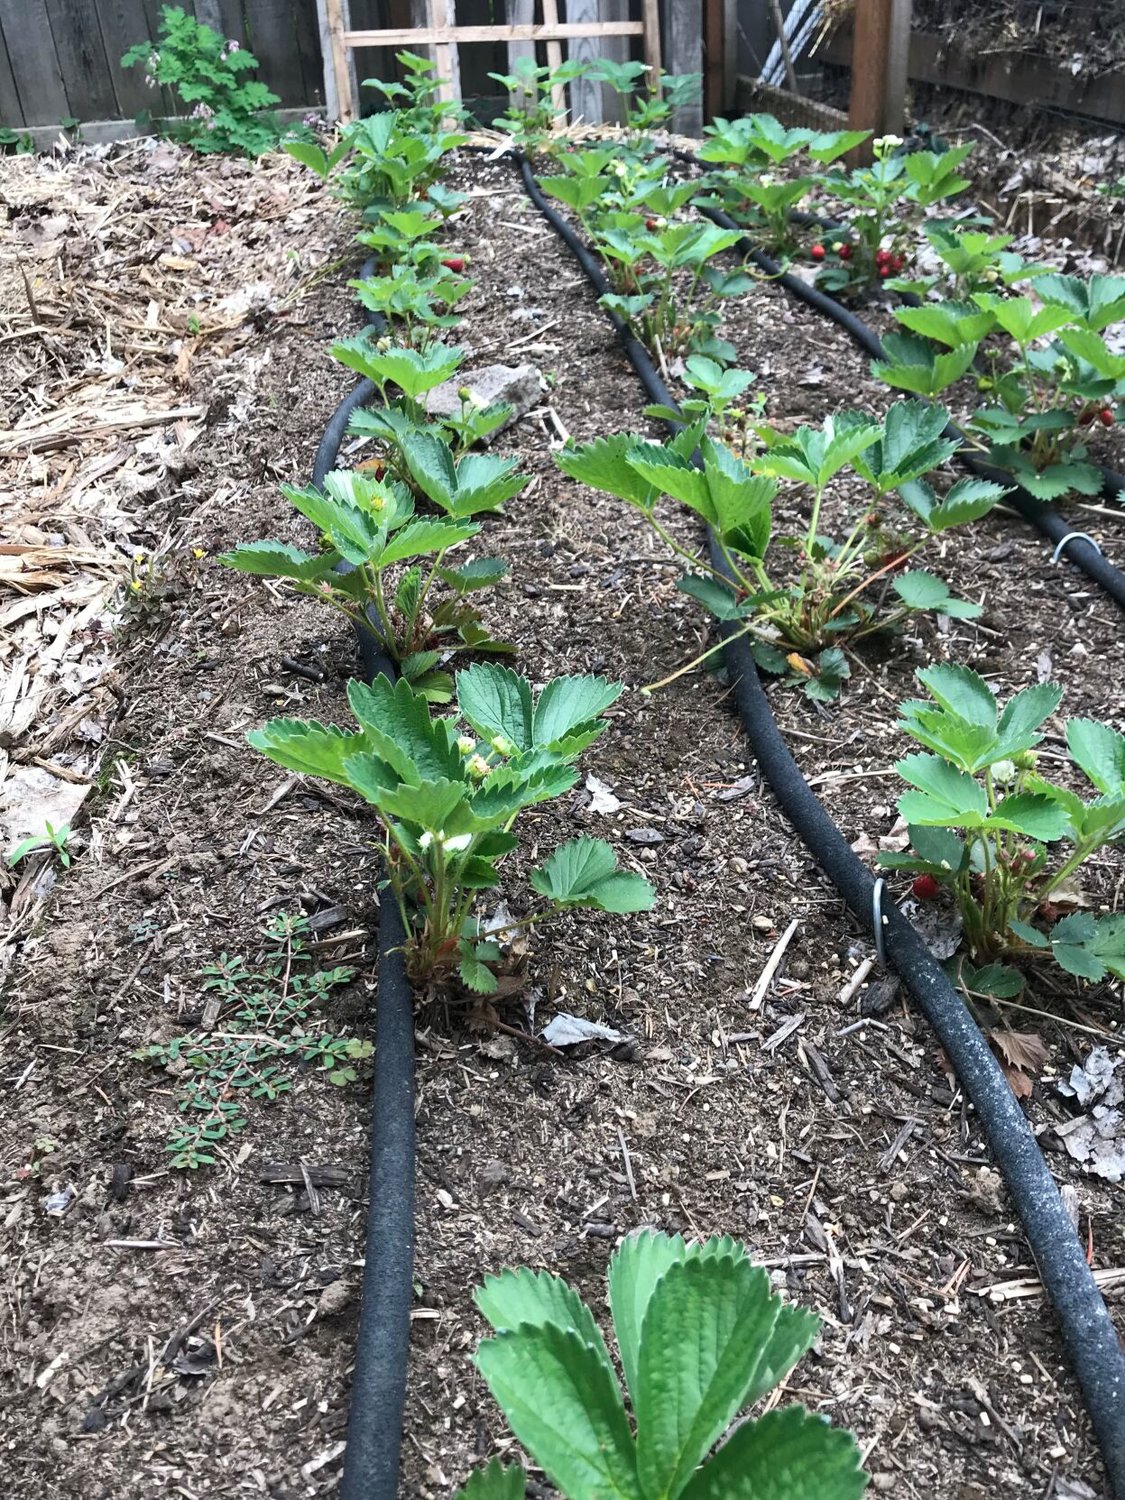 A drip irrigation system is among several ways to keep plants watered